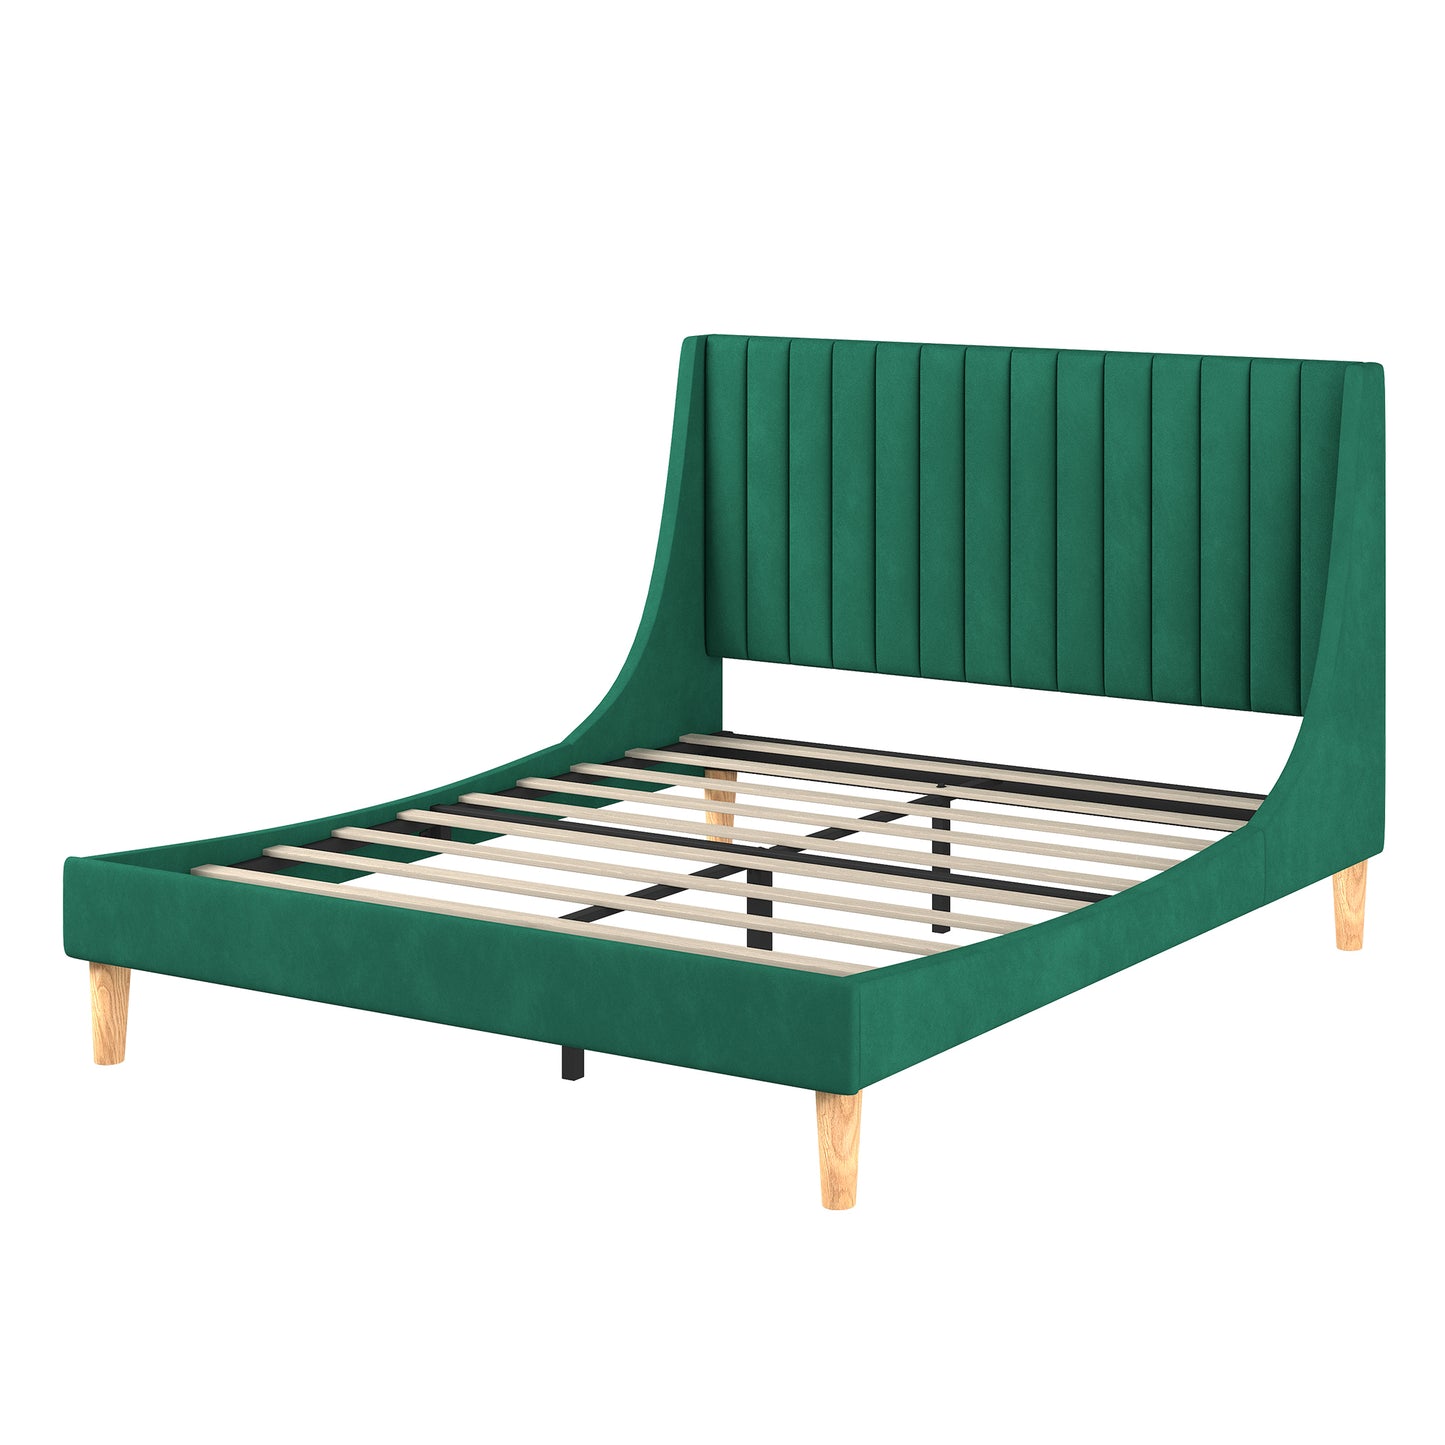 Queen Size Platform Bed with Upholstered Headboard and Slat Support, Heavy Duty Mattress Foundation, No Box Spring Required, Easy to Assemble,Green